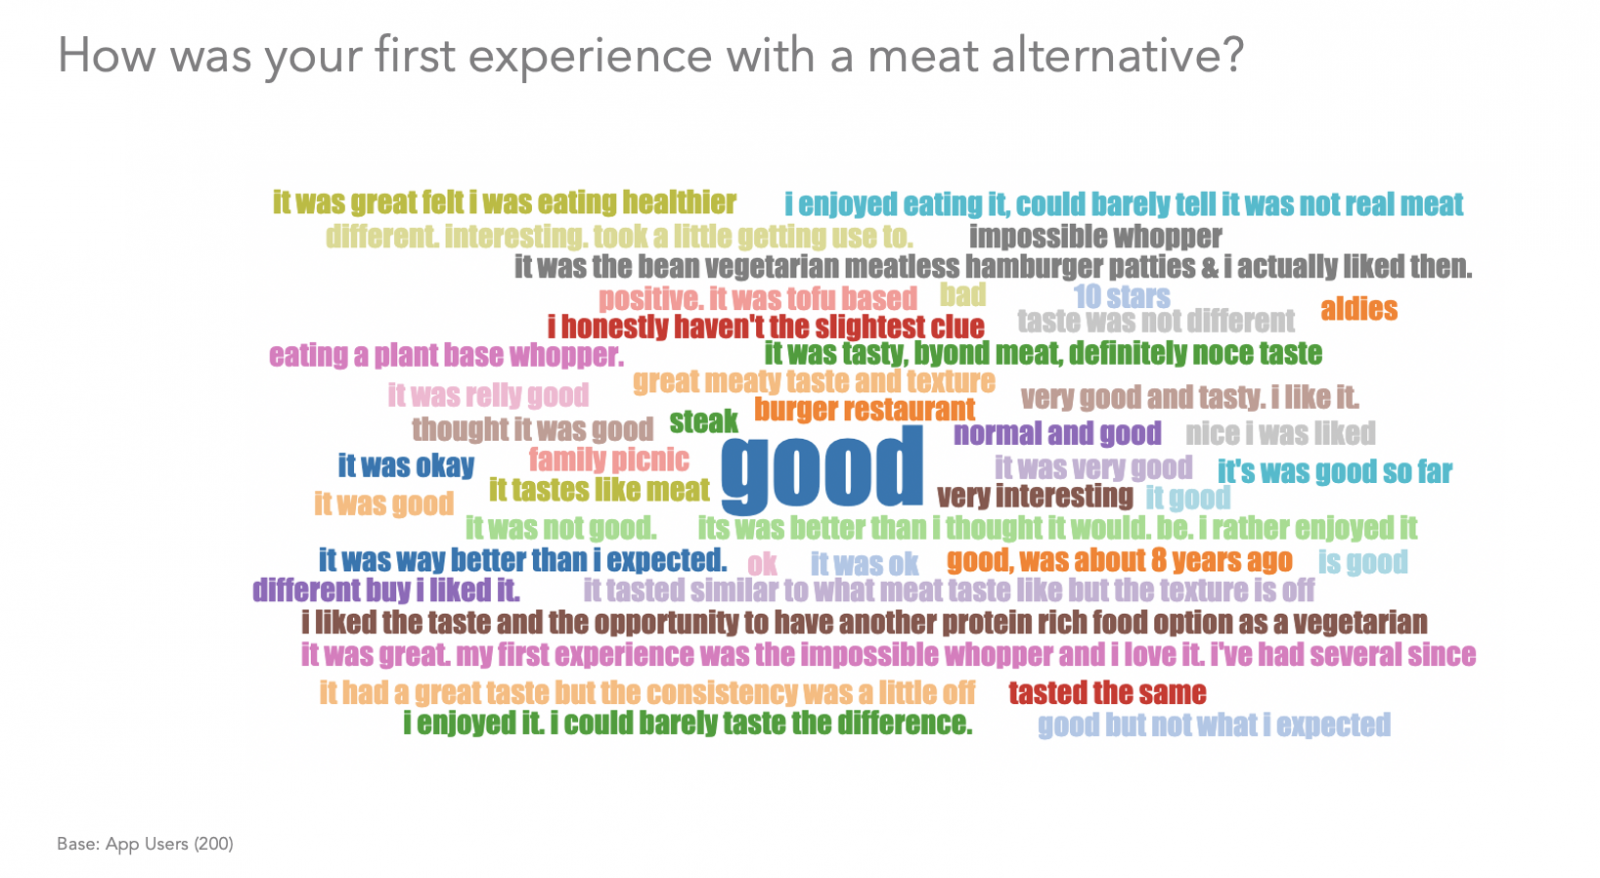 How was your first experience with a meat alternative?